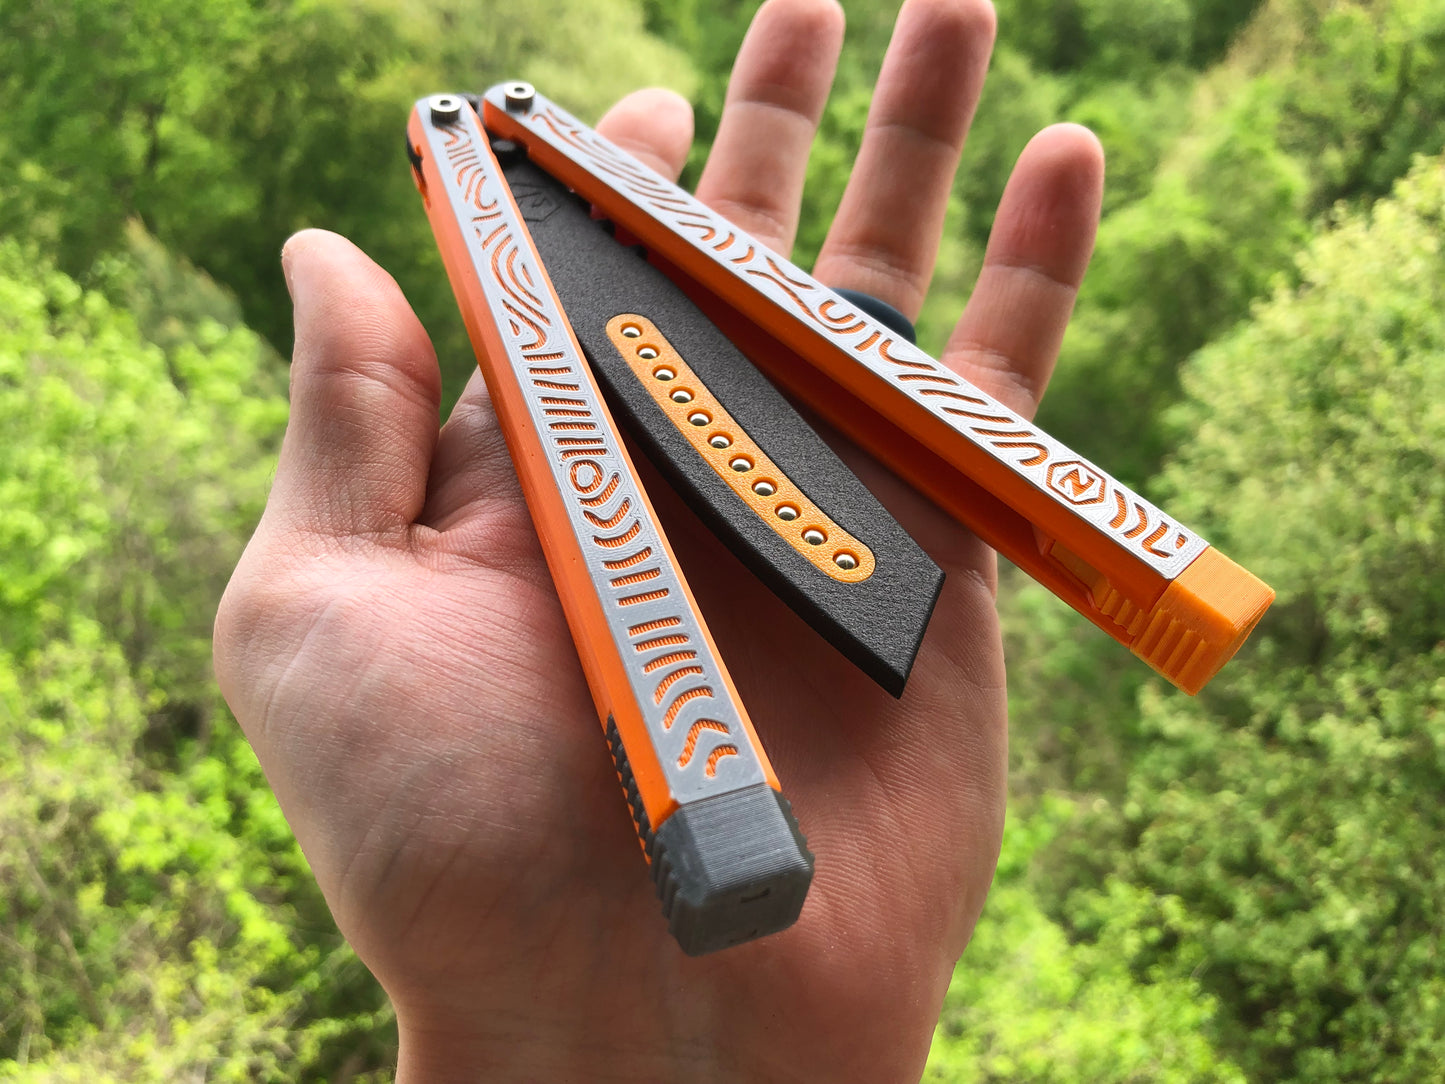 The most durable and premium plastic balisong trainer available: The Zippy Cycloid is the best plastic balisong for beginners and experienced flippers alike, featuring the renowned Zippy bearing system, chanwich design, and adjustable balance.The most durable and premium plastic balisong trainer available: The Zippy Cycloid is the best plastic balisong for beginners and experienced flippers alike, featuring the renowned Zippy bearing system, chanwich design, and adjustable balance.